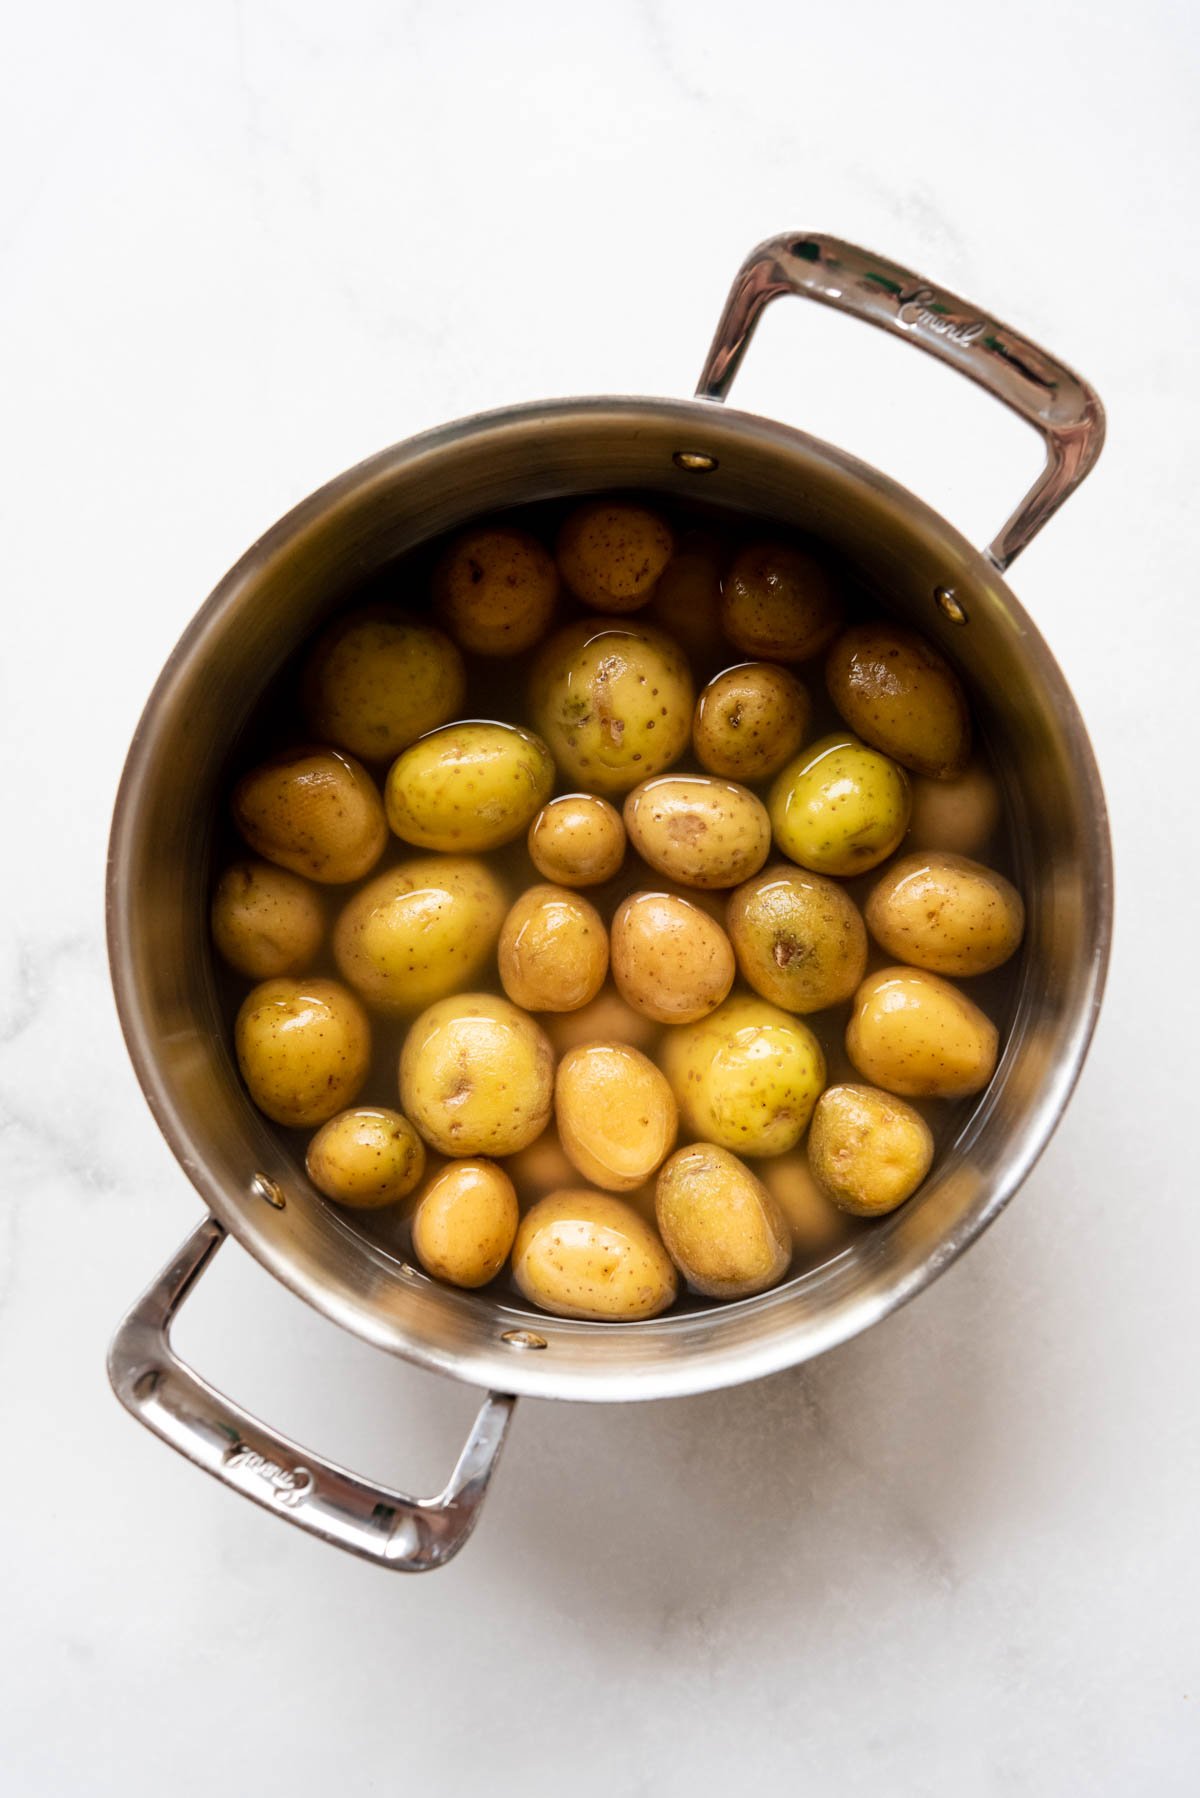 Small potatoes in a large pot of salted water.